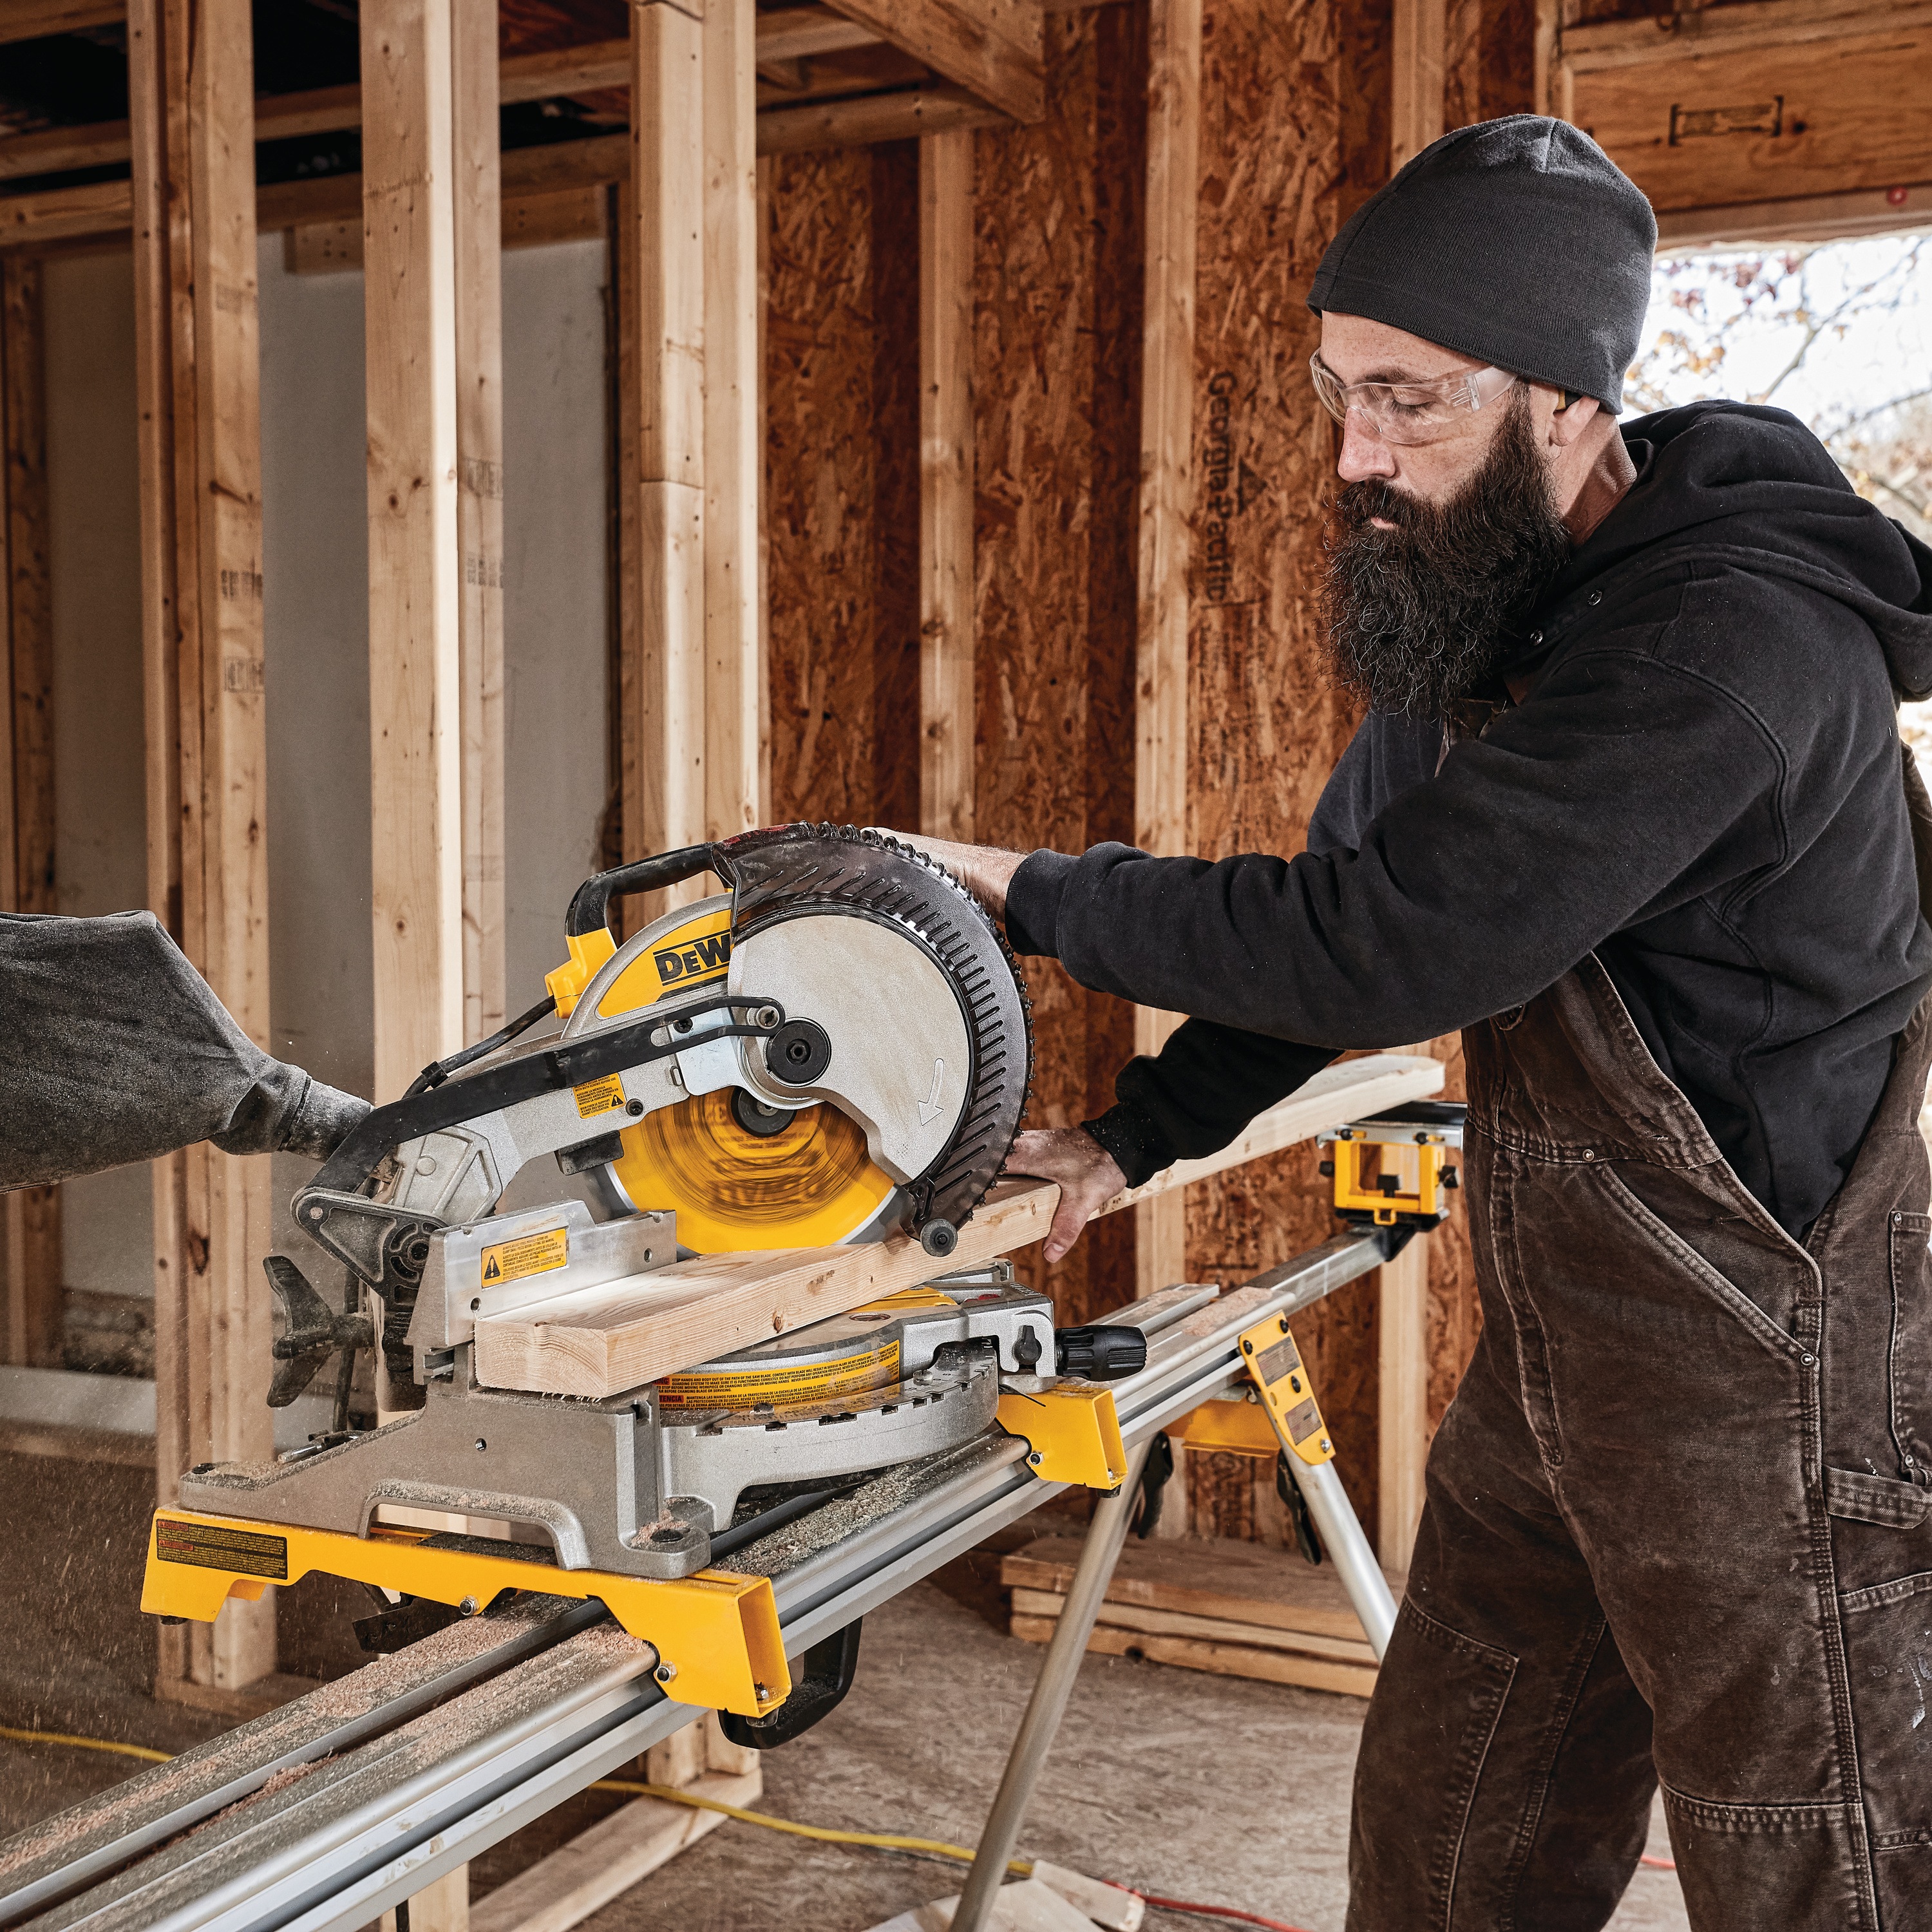 Electric single bevel compound miter saw being used by a person to cut wood.